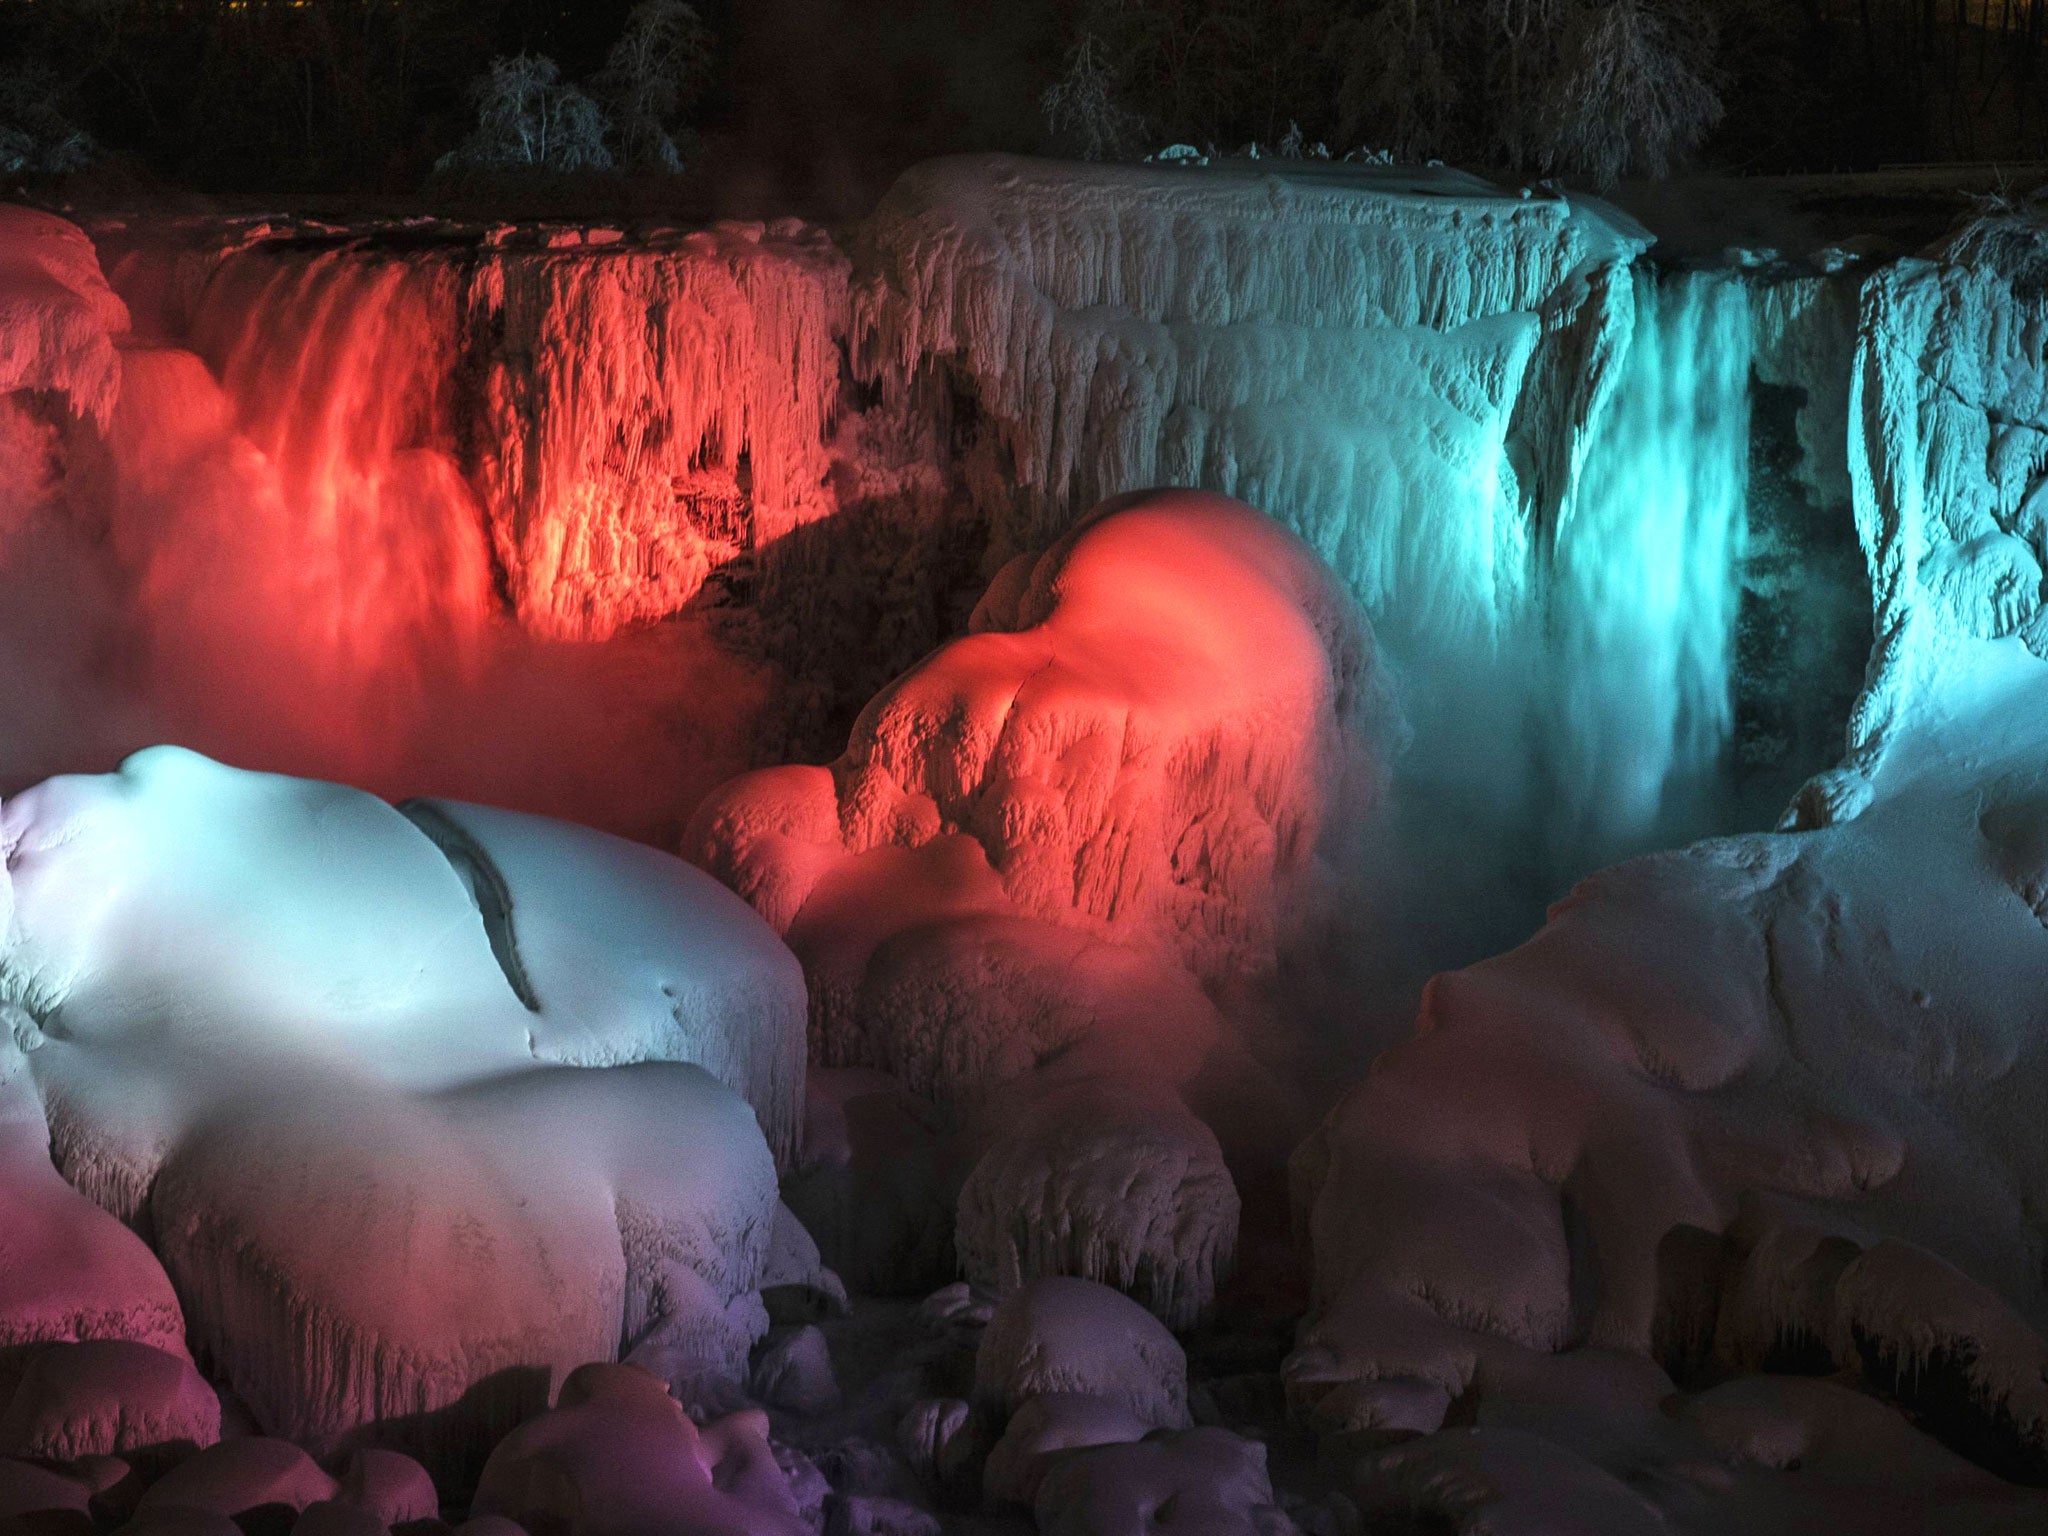 A partially frozen American Falls is seen lit by lights during sub freezing temperatures in Niagara Falls, Ontario